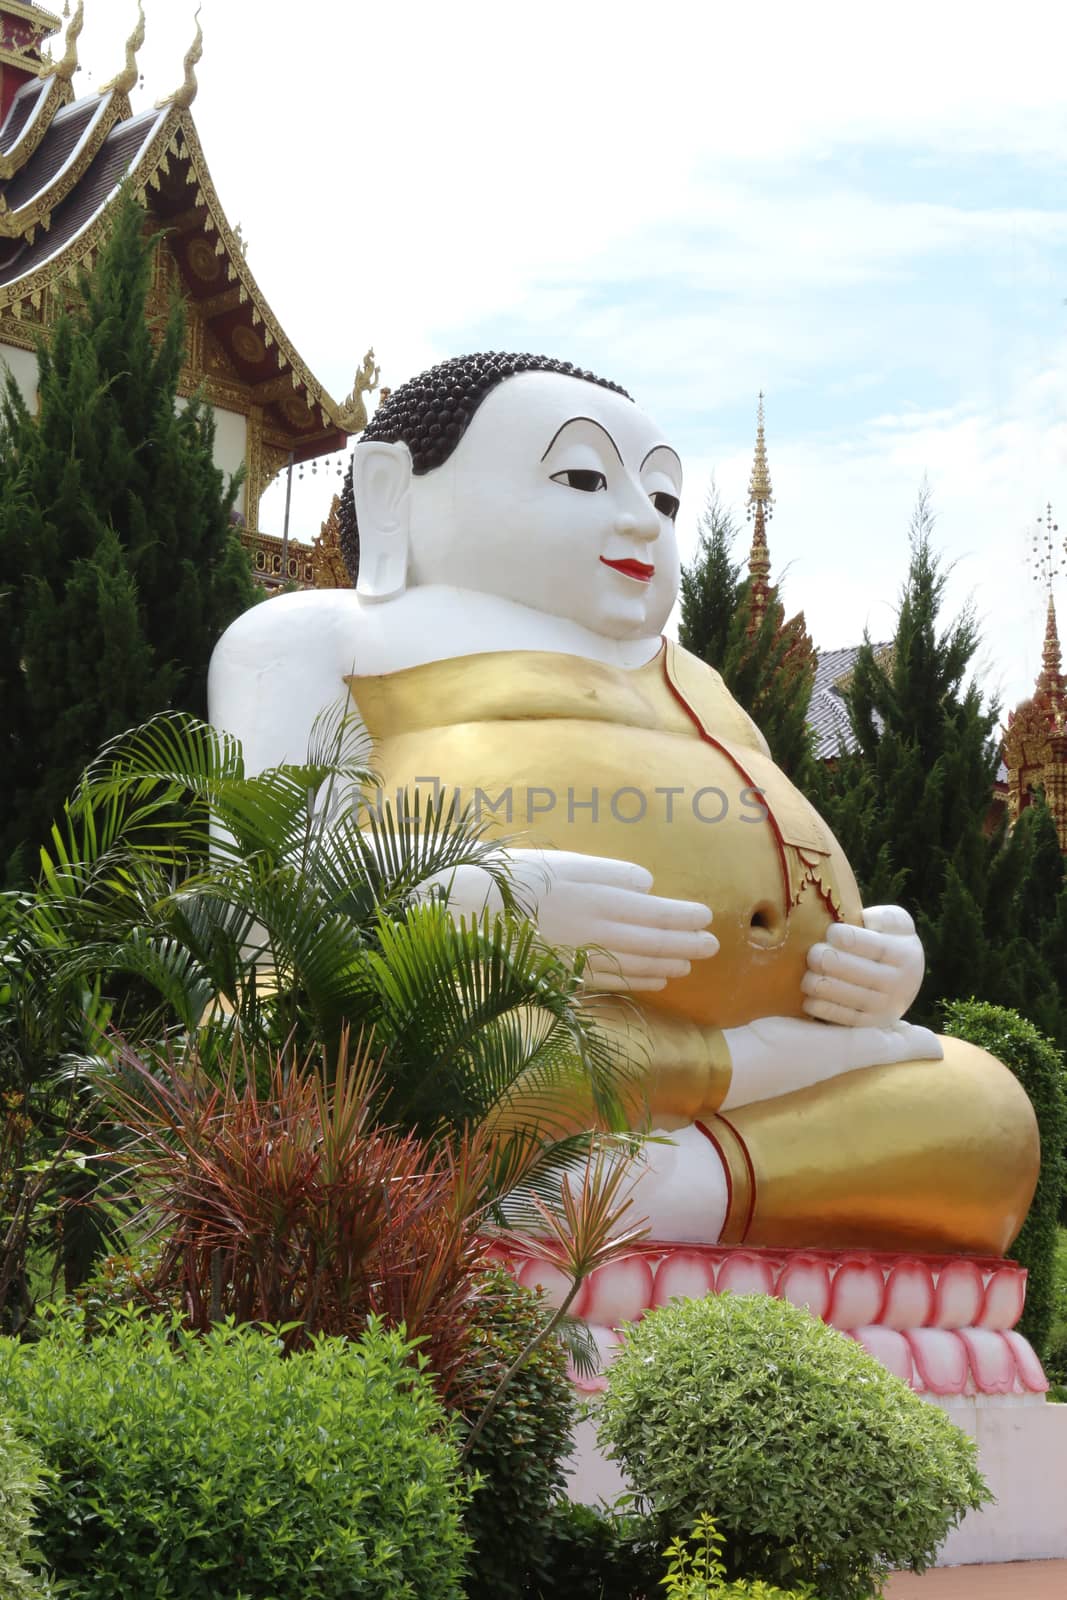 The statue of happy Buddha is located at temple.